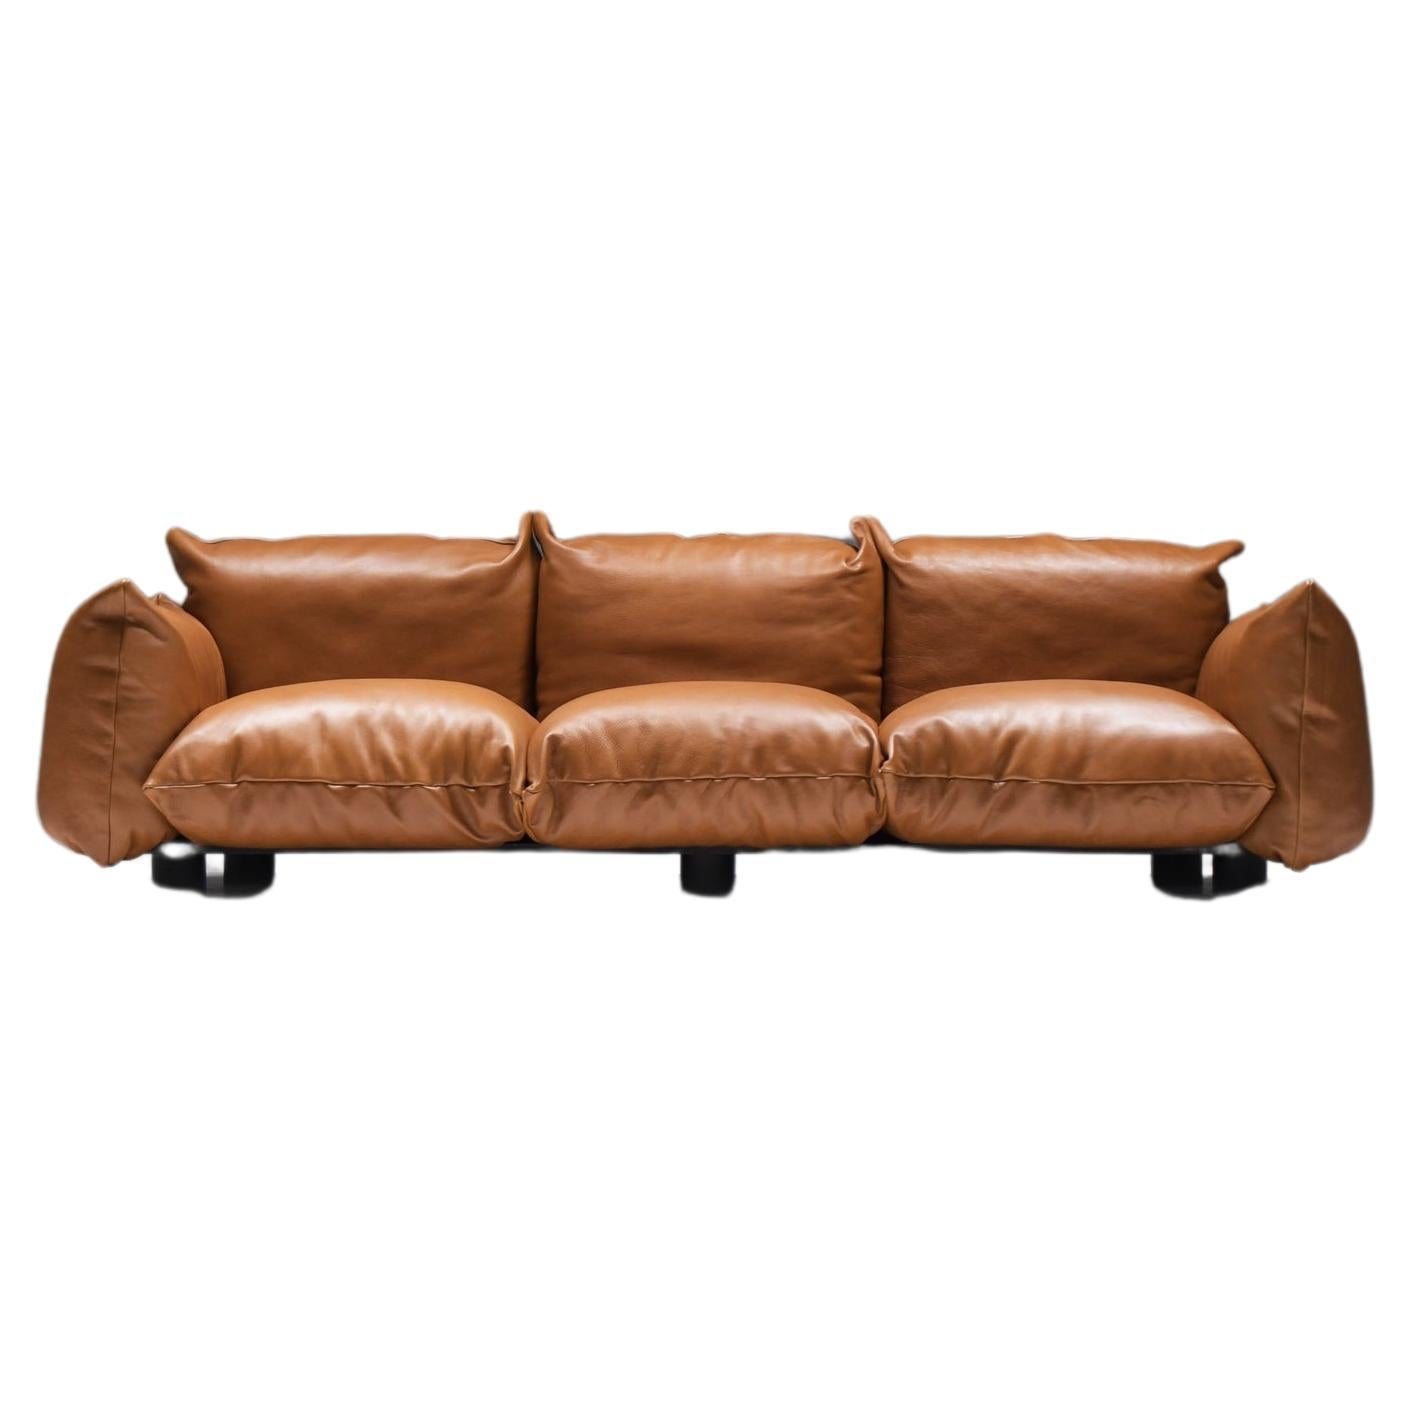 Vintage Marenco 255 sofa in new cognac leather by Mario Marenco for ARFLEX Italy For Sale